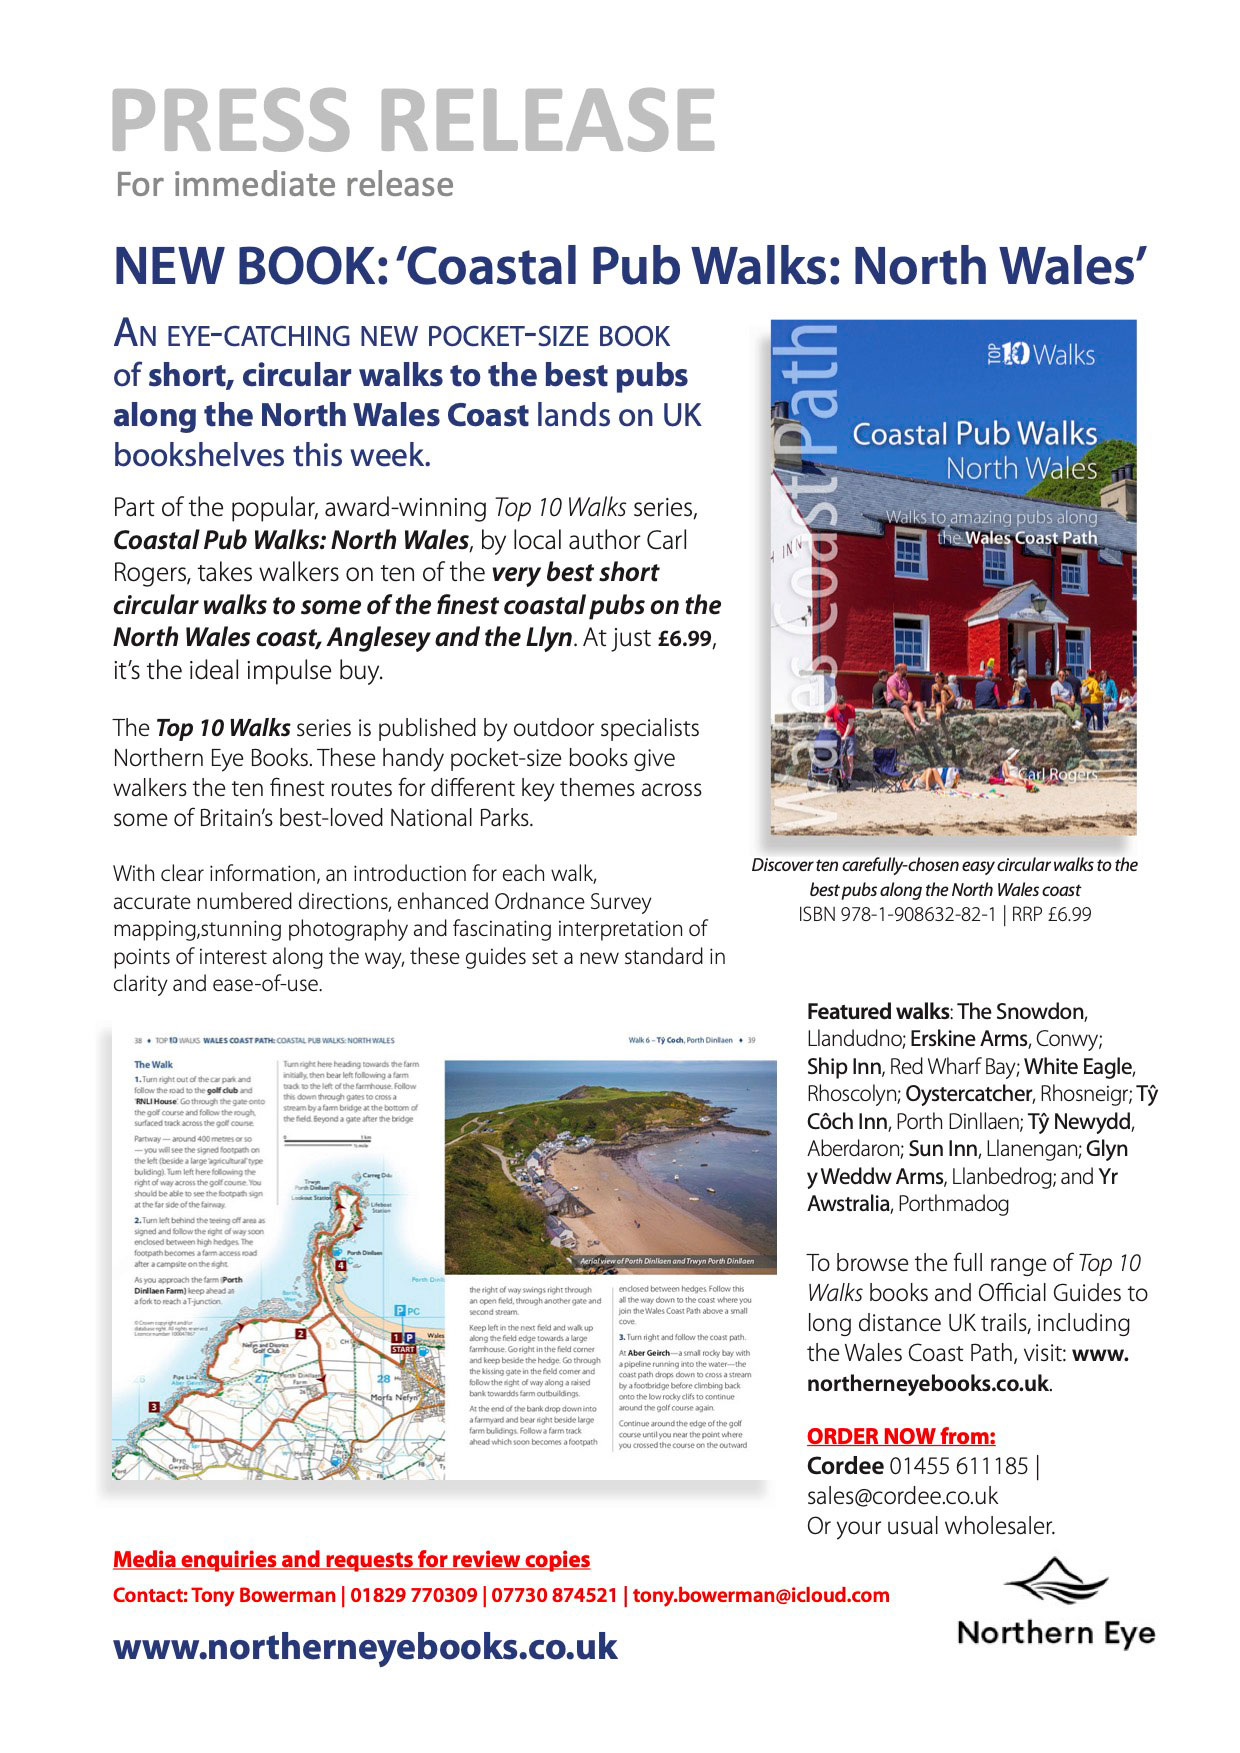 Circular walks to some of the best coastal pubs along the North Wales Coast